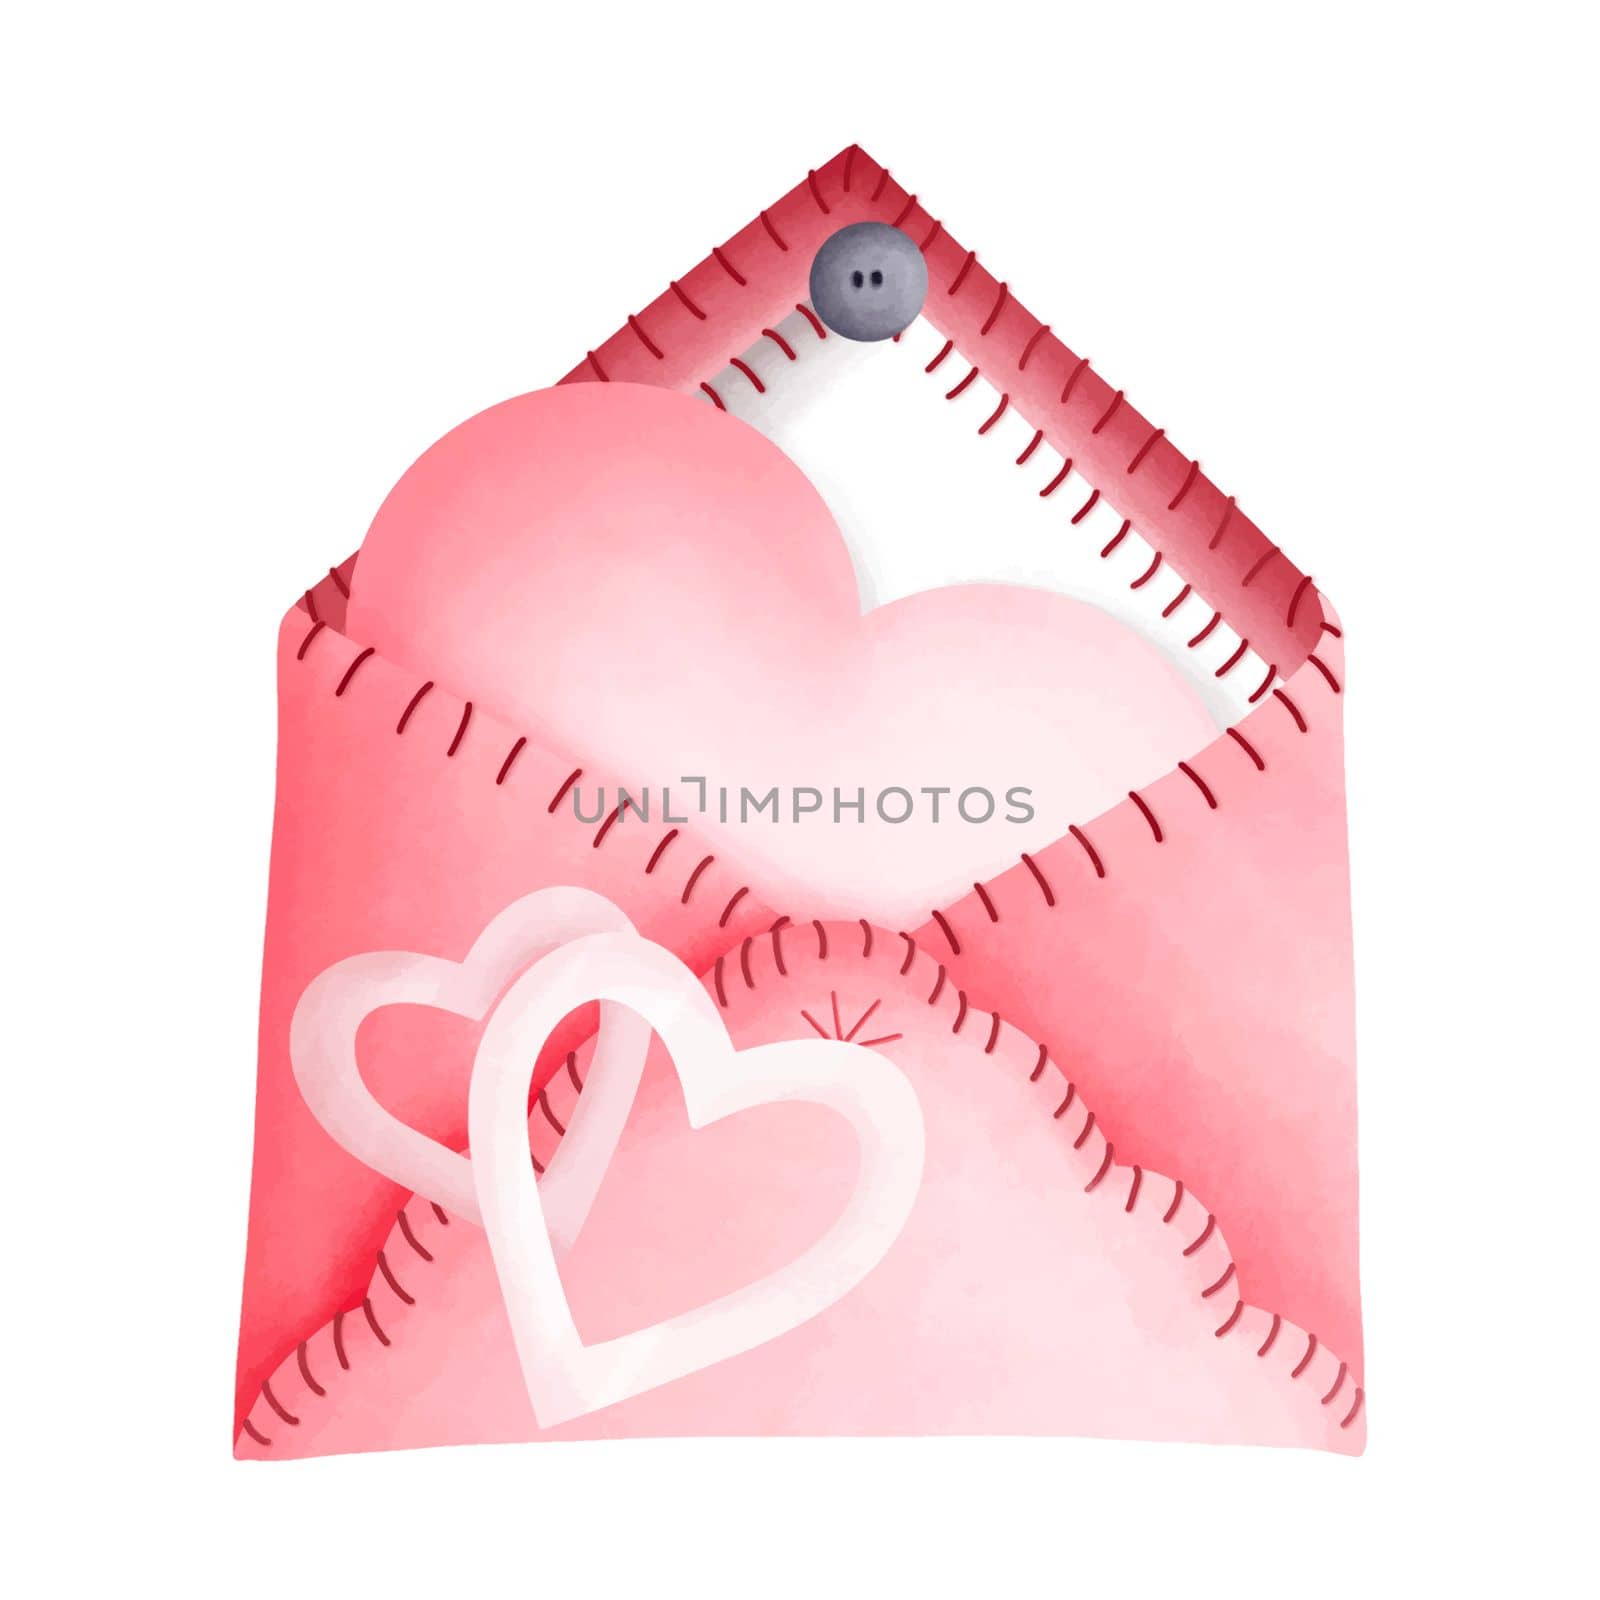 Love letter in Red Envelope  Cute Romantic Watercolor Clipart PNG. Paris In Love collection with diy lovely letter for romantic design element, love art, wedding watercolor illustration.